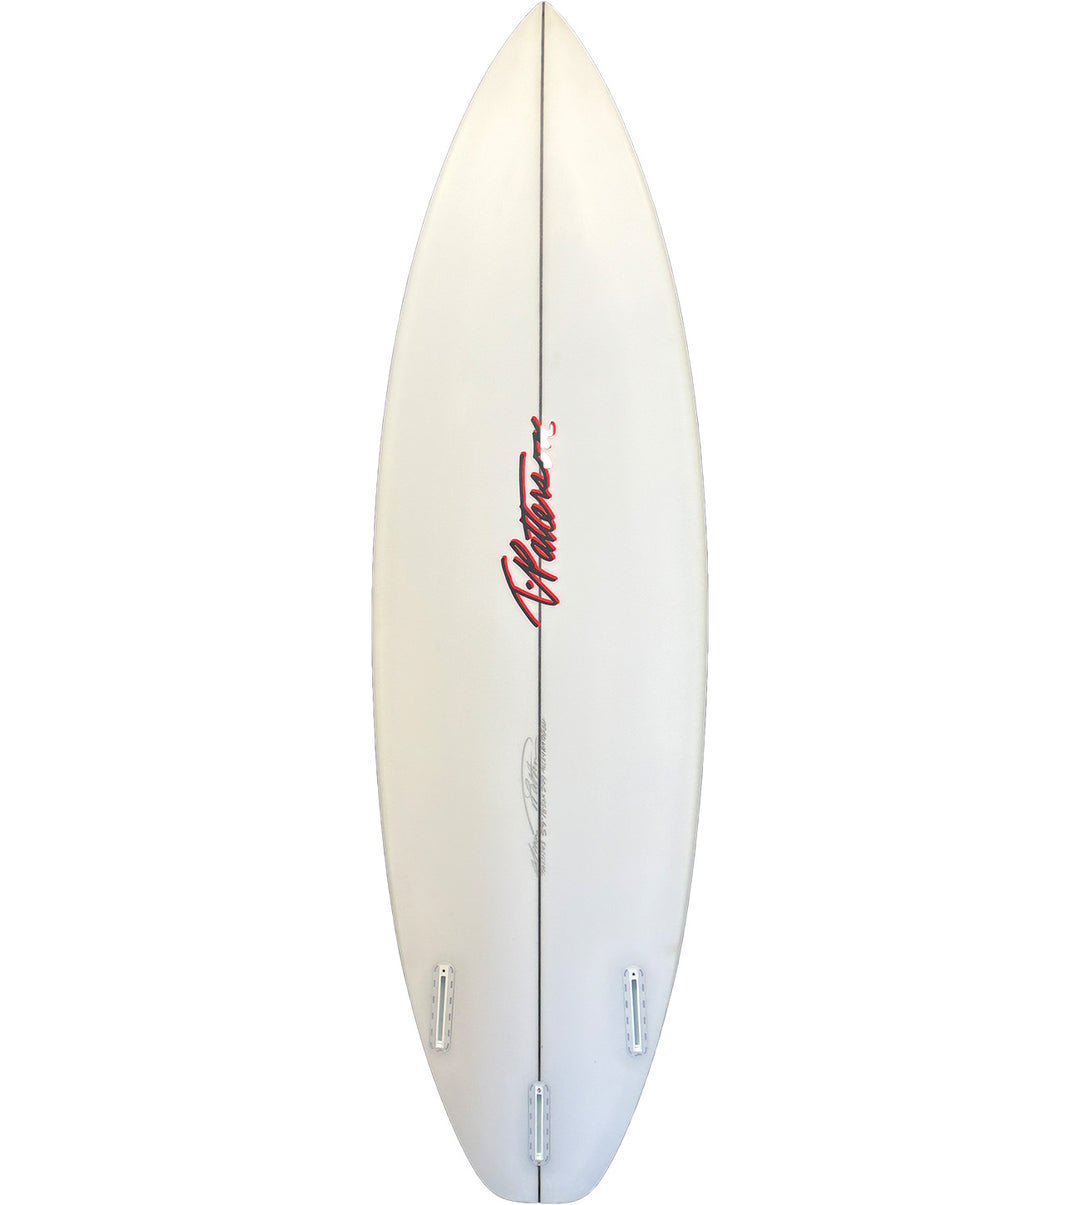 TPatterson Surfboard
Alley Rat/Futures 5'9 #TPS231343